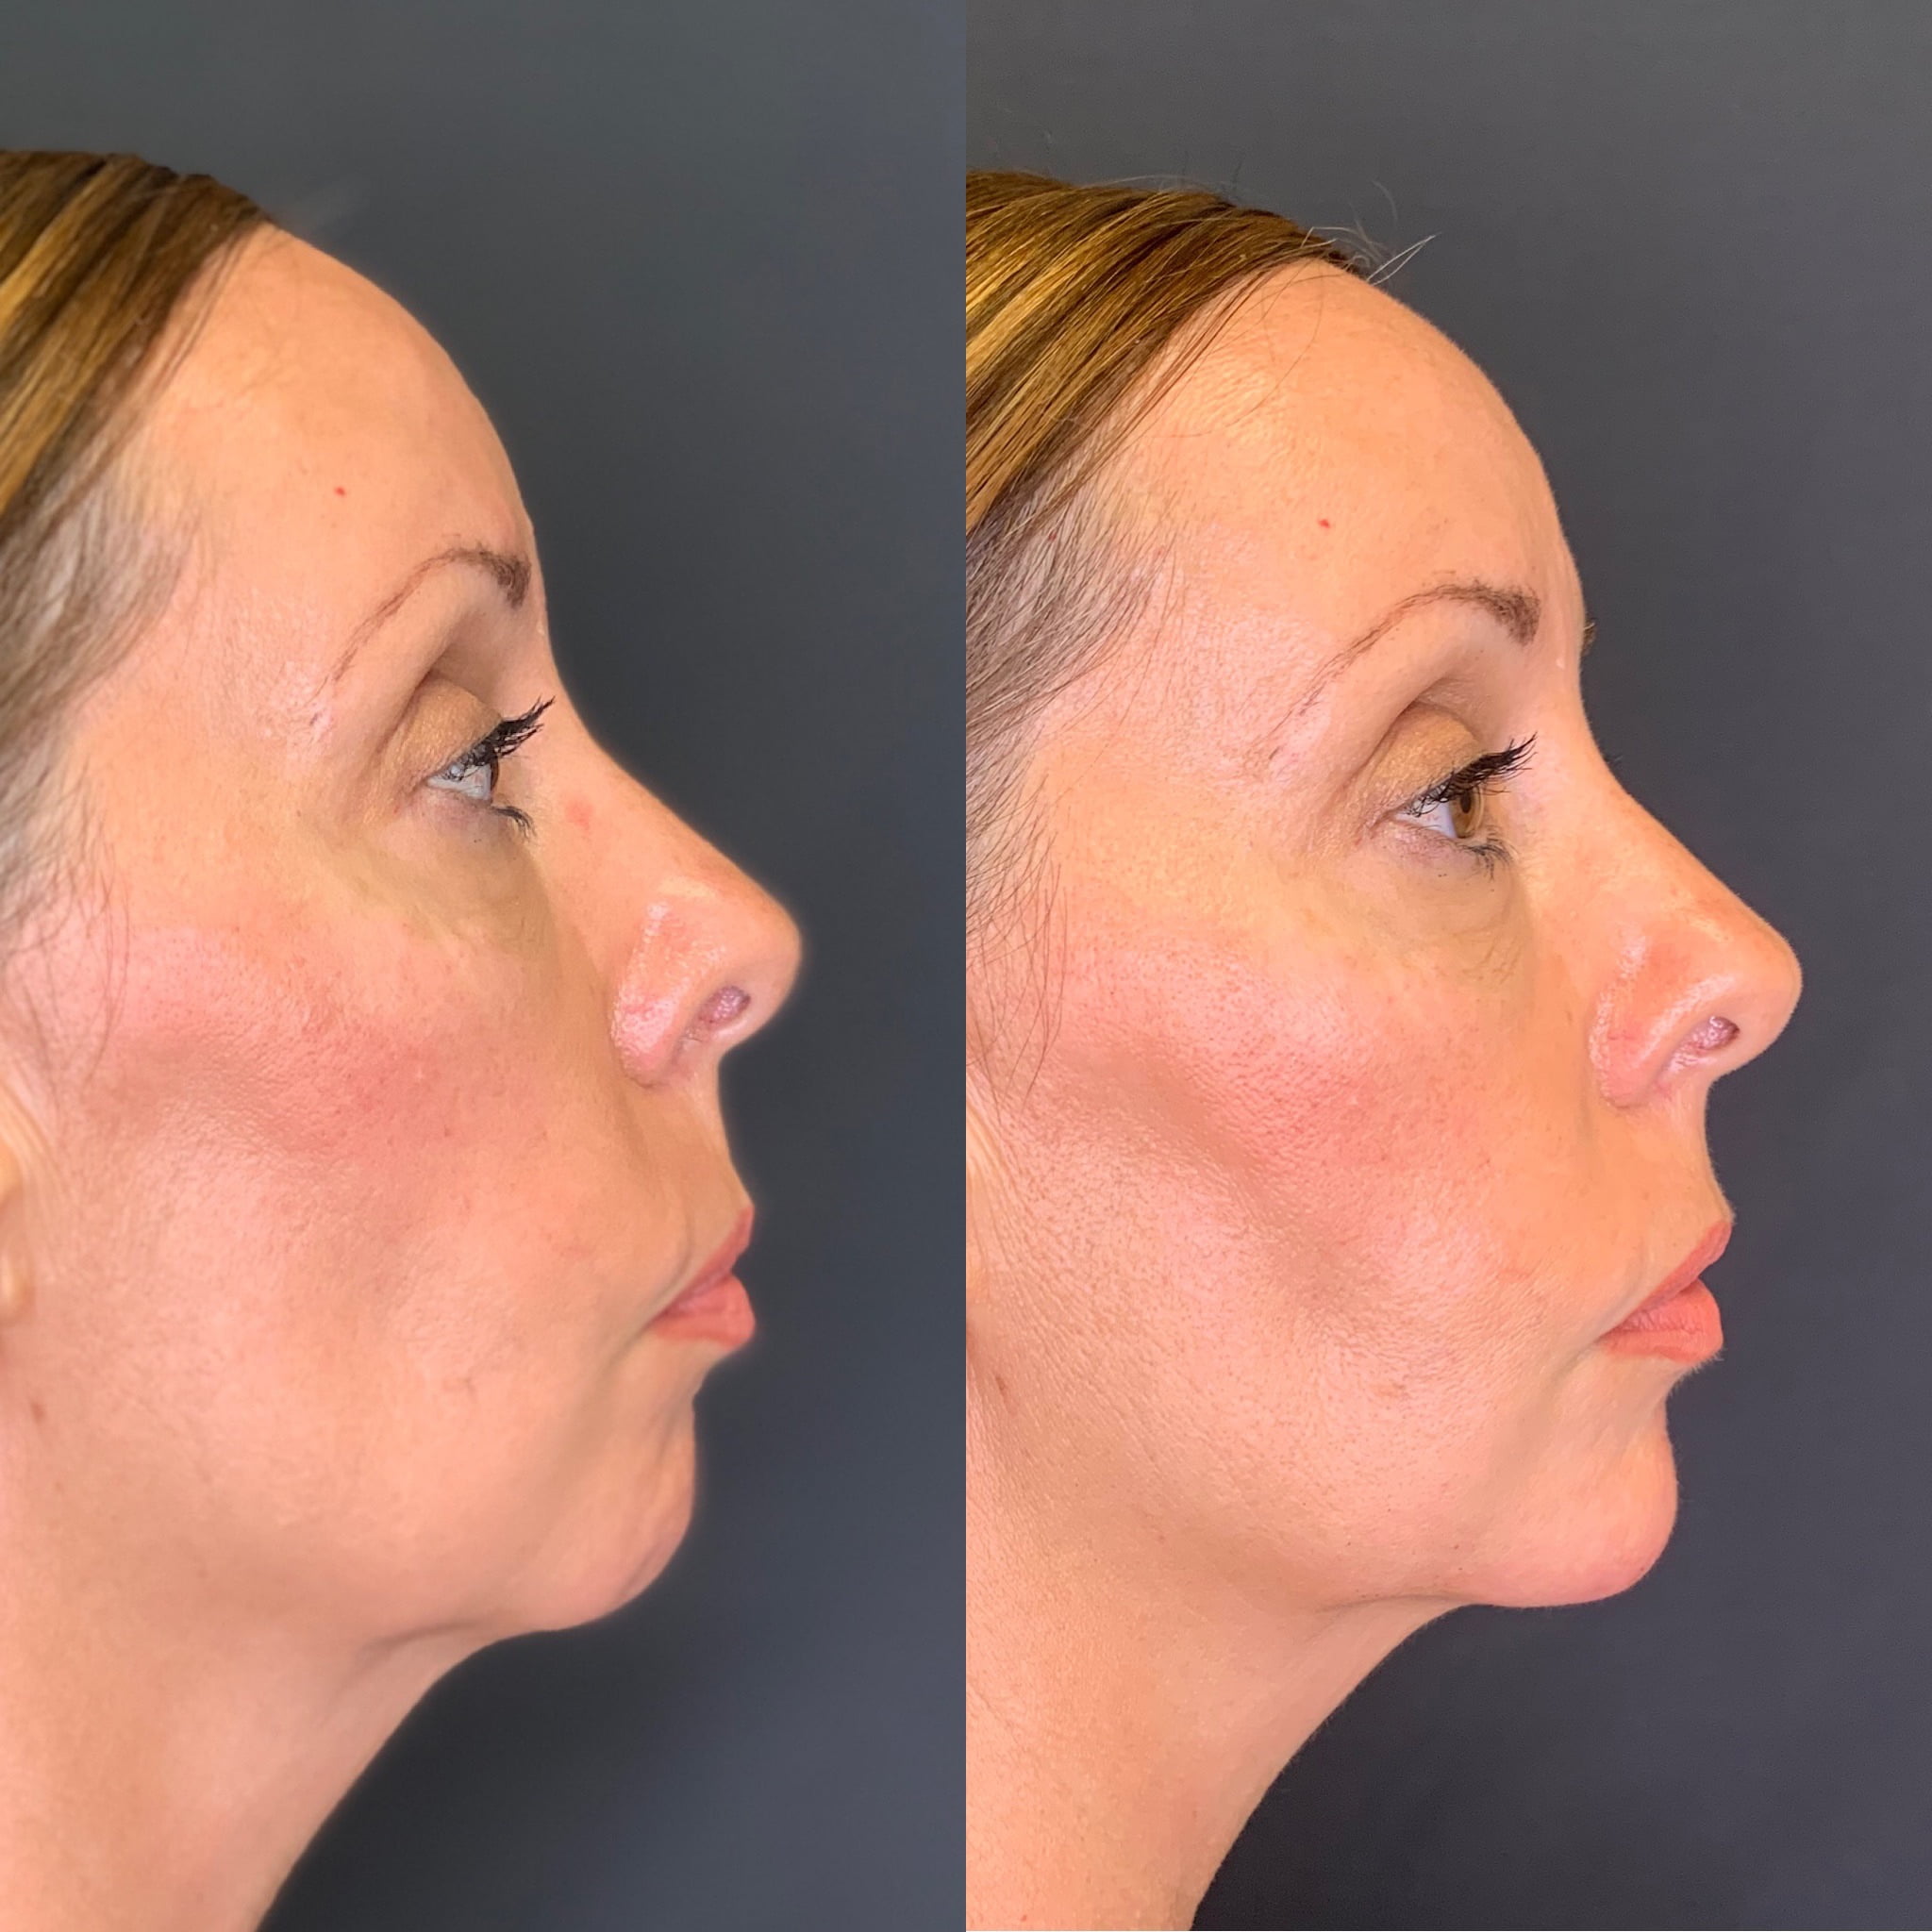 Before and After treatment results on Chin | Beauty Boost Med Spa in Newport Beach, CA